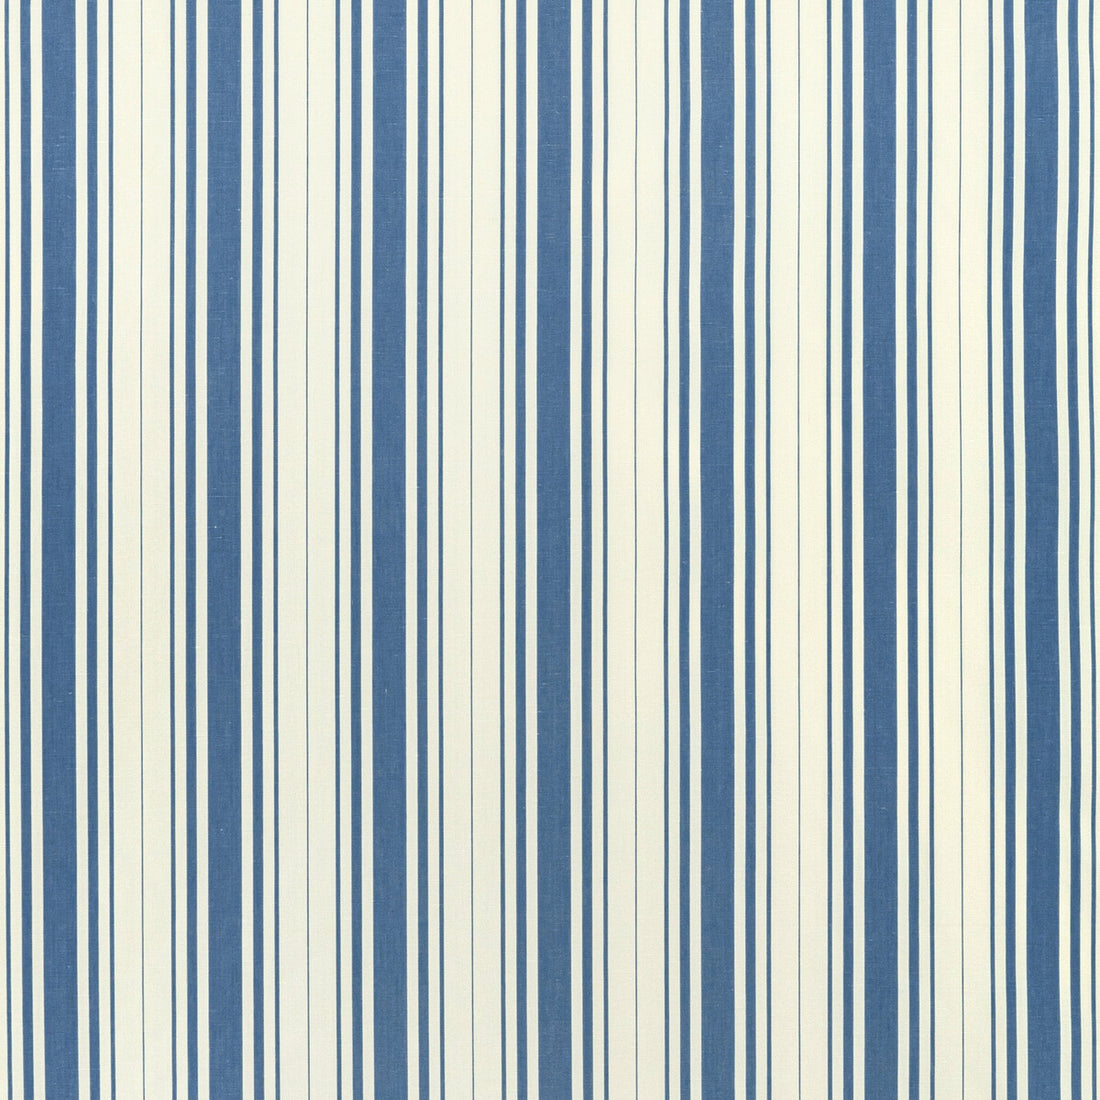 Baldwin Stripe fabric in navy color - pattern 2022100.50.0 - by Lee Jofa in the Sarah Bartholomew collection